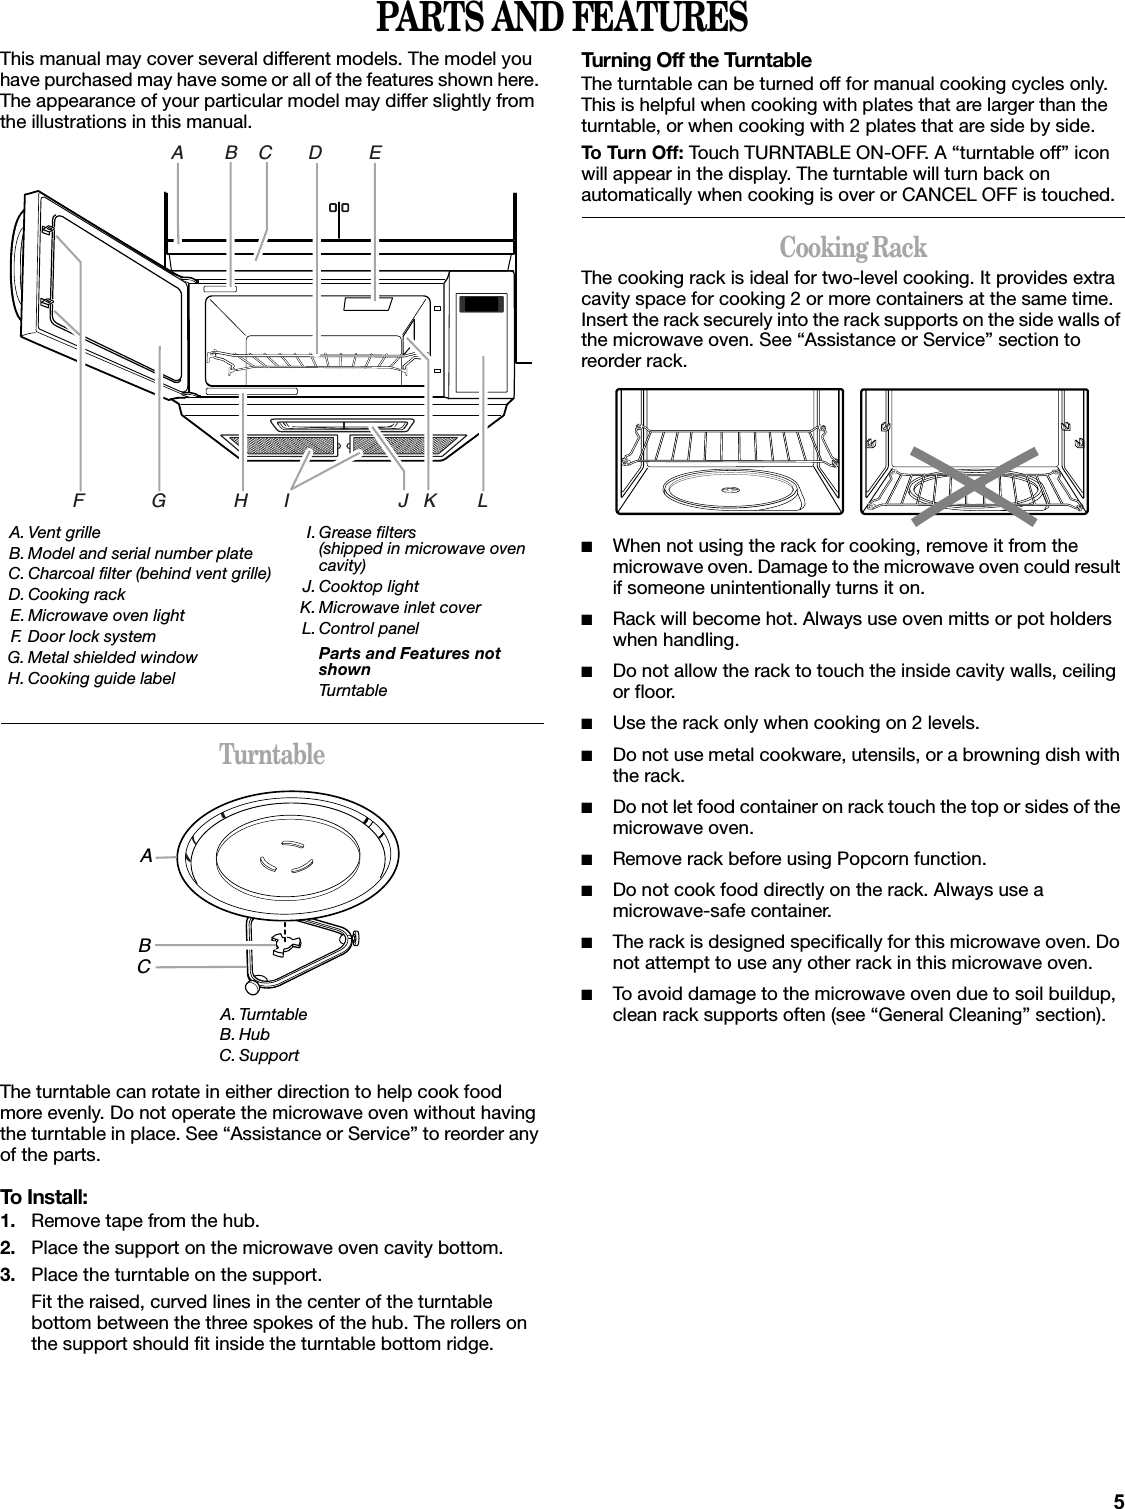 5PARTS AND FEATURESThis manual may cover several different models. The model you have purchased may have some or all of the features shown here. The appearance of your particular model may differ slightly from the illustrations in this manual.TurntableThe turntable can rotate in either direction to help cook food more evenly. Do not operate the microwave oven without having the turntable in place. See “Assistance or Service” to reorder any of the parts.To Install:1. Remove tape from the hub.2. Place the support on the microwave oven cavity bottom.3. Place the turntable on the support.Fit the raised, curved lines in the center of the turntable bottom between the three spokes of the hub. The rollers on the support should fit inside the turntable bottom ridge.Turning Off the TurntableThe turntable can be turned off for manual cooking cycles only. This is helpful when cooking with plates that are larger than the turntable, or when cooking with 2 plates that are side by side.To Turn Off: Touch TURNTABLE ON-OFF. A “turntable off” icon will appear in the display. The turntable will turn back on automatically when cooking is over or CANCEL OFF is touched.Cooking RackThe cooking rack is ideal for two-level cooking. It provides extra cavity space for cooking 2 or more containers at the same time. Insert the rack securely into the rack supports on the side walls of the microwave oven. See “Assistance or Service” section to reorder rack.■When not using the rack for cooking, remove it from the microwave oven. Damage to the microwave oven could result if someone unintentionally turns it on.■Rack will become hot. Always use oven mitts or pot holders when handling.■Do not allow the rack to touch the inside cavity walls, ceiling or floor.■Use the rack only when cooking on 2 levels.■Do not use metal cookware, utensils, or a browning dish with the rack.■Do not let food container on rack touch the top or sides of the microwave oven.■Remove rack before using Popcorn function.■Do not cook food directly on the rack. Always use a microwave-safe container.■The rack is designed specifically for this microwave oven. Do not attempt to use any other rack in this microwave oven.■To avoid damage to the microwave oven due to soil buildup, clean rack supports often (see “General Cleaning” section).A. Vent grilleB. Model and serial number plateC. Charcoal filter (behind vent grille)D. Cooking rackE. Microwave oven lightF. Door lock systemG. Metal shielded windowH. Cooking guide labelI. Grease filters (shipped in microwave oven cavity)J. Cooktop lightK. Microwave inlet coverL. Control panelParts and Features not shownTurntableA. TurntableB. HubC. SupportA        B    C       D         EF             G             H       I                     J   K        LABC